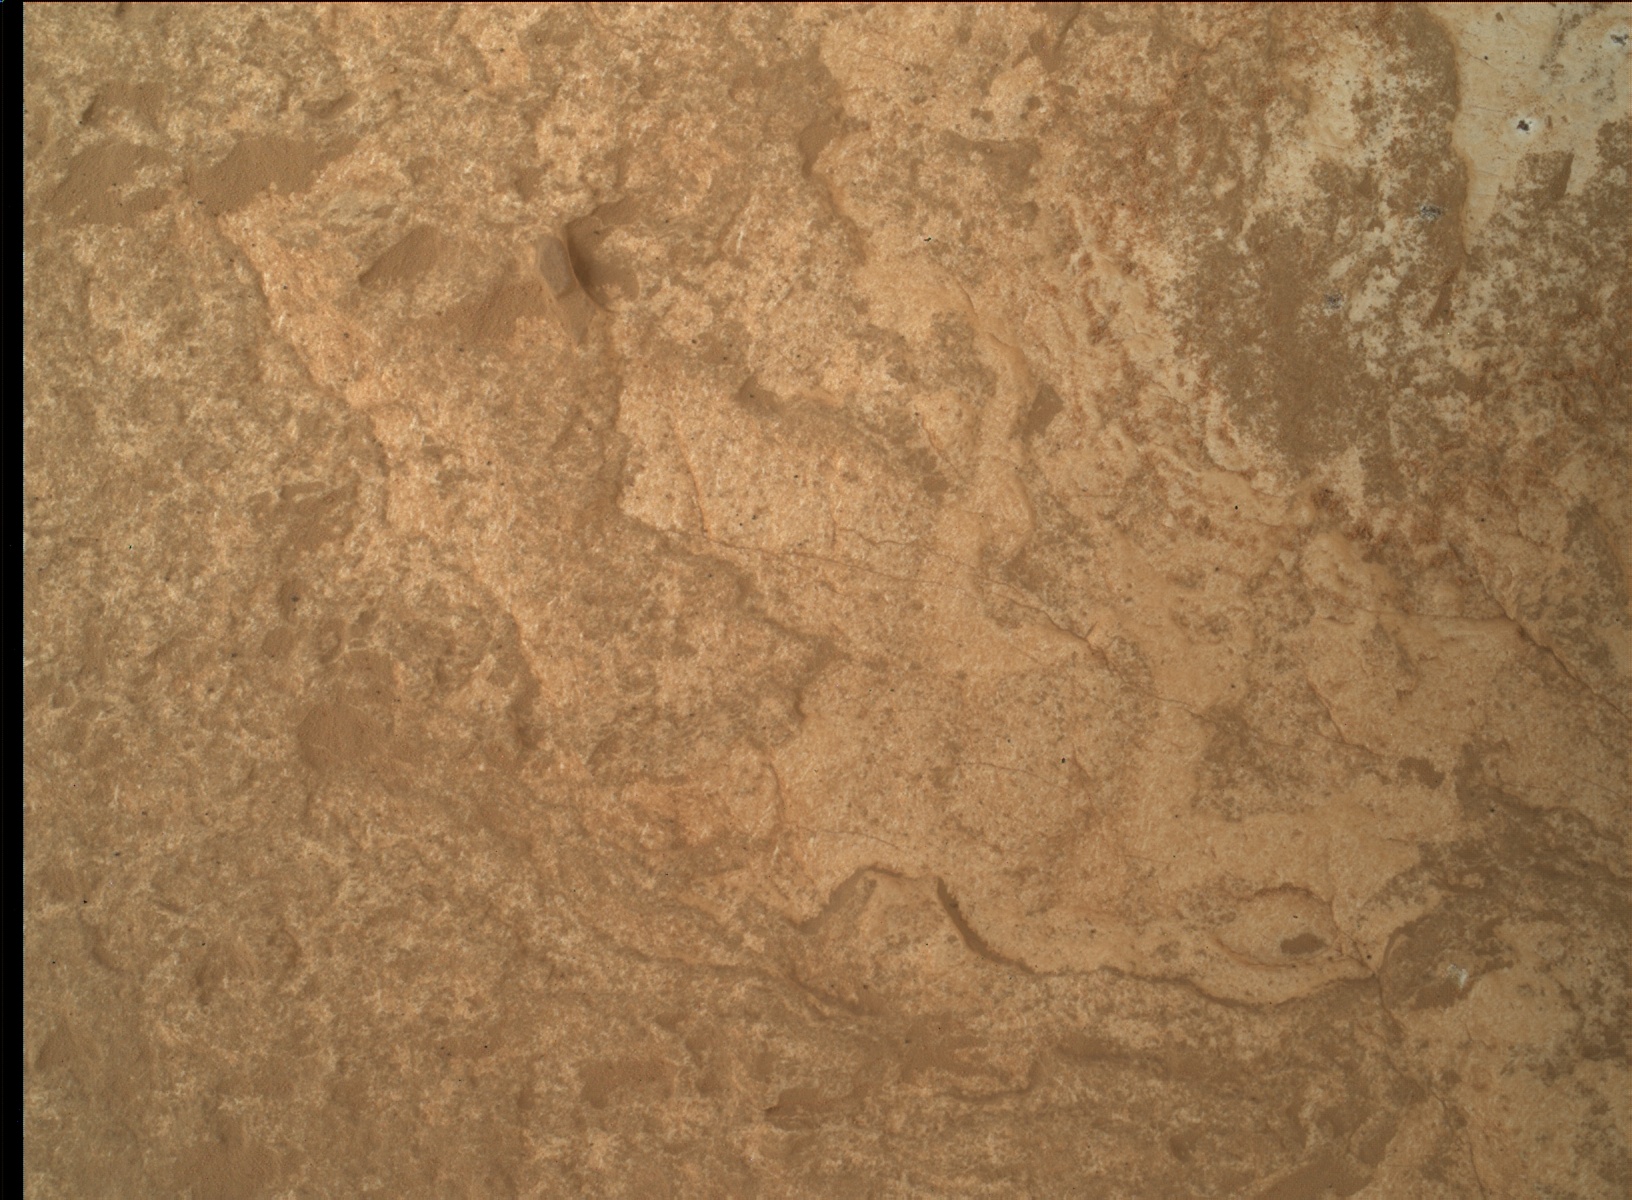 Nasa's Mars rover Curiosity acquired this image using its Mars Hand Lens Imager (MAHLI) on Sol 1725